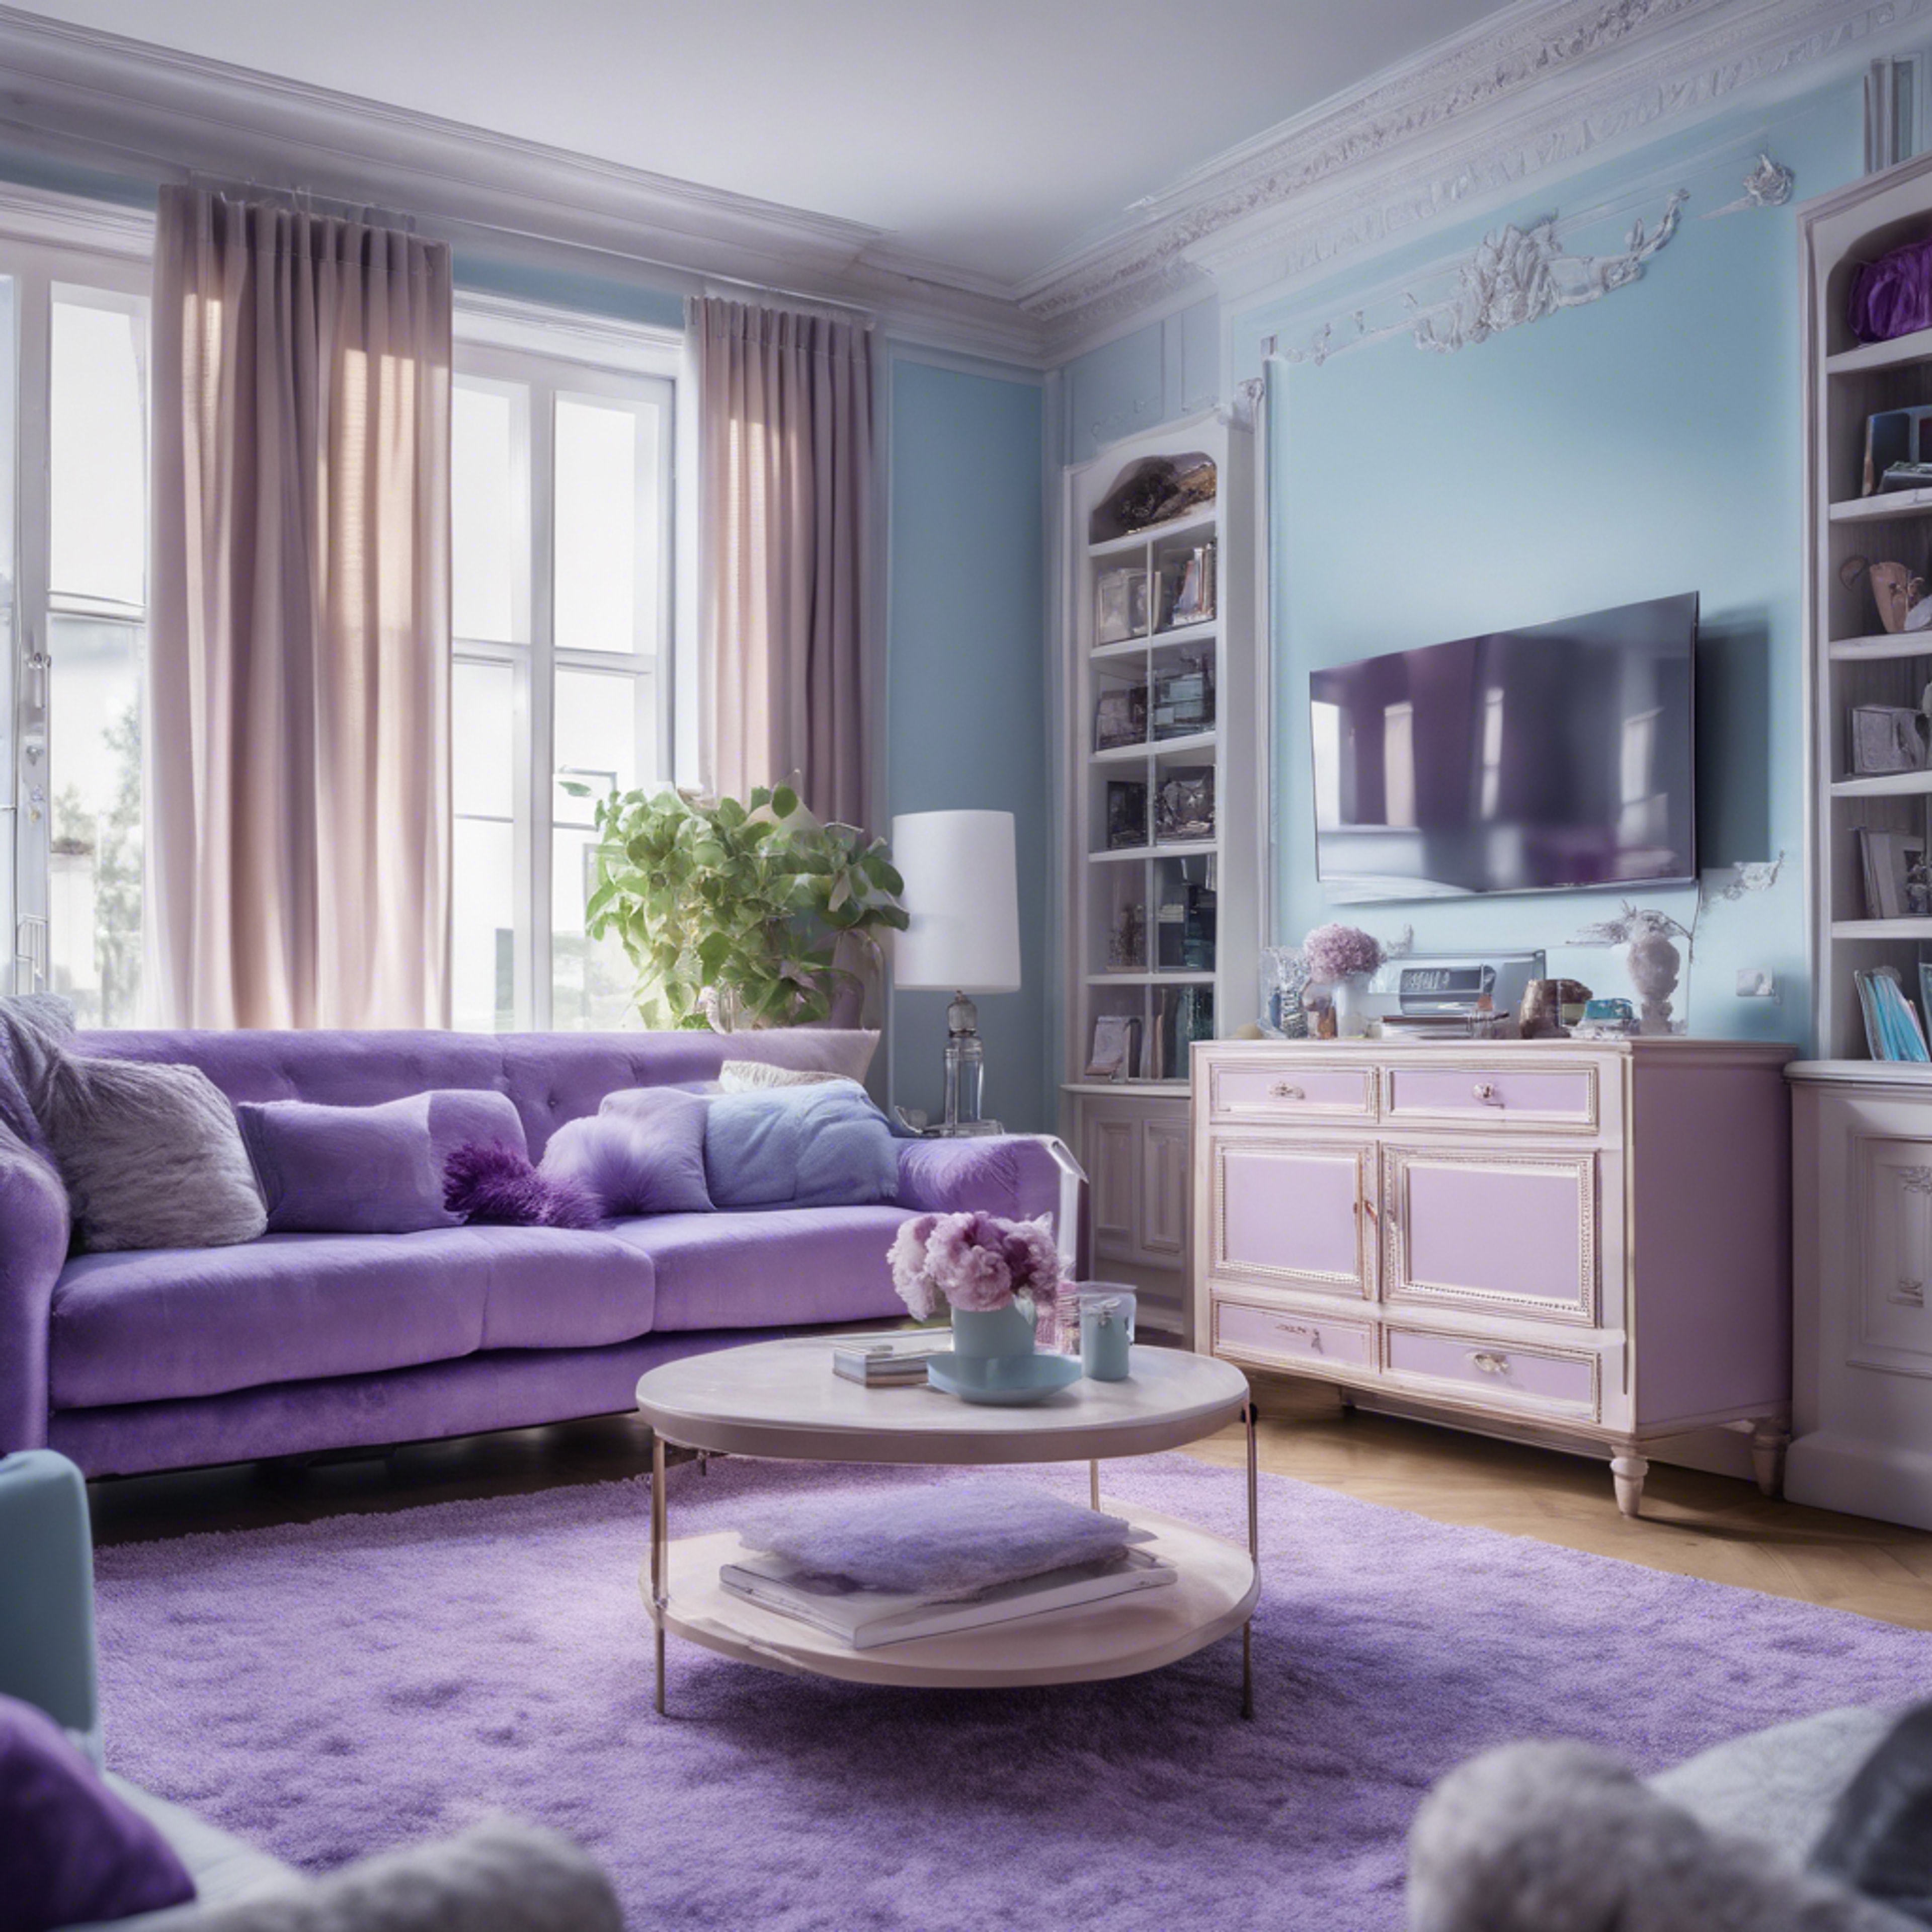 A preppy pale blue and purple themed living room with plush furnishings. Wallpaper[1c55319af0b34b75a0be]